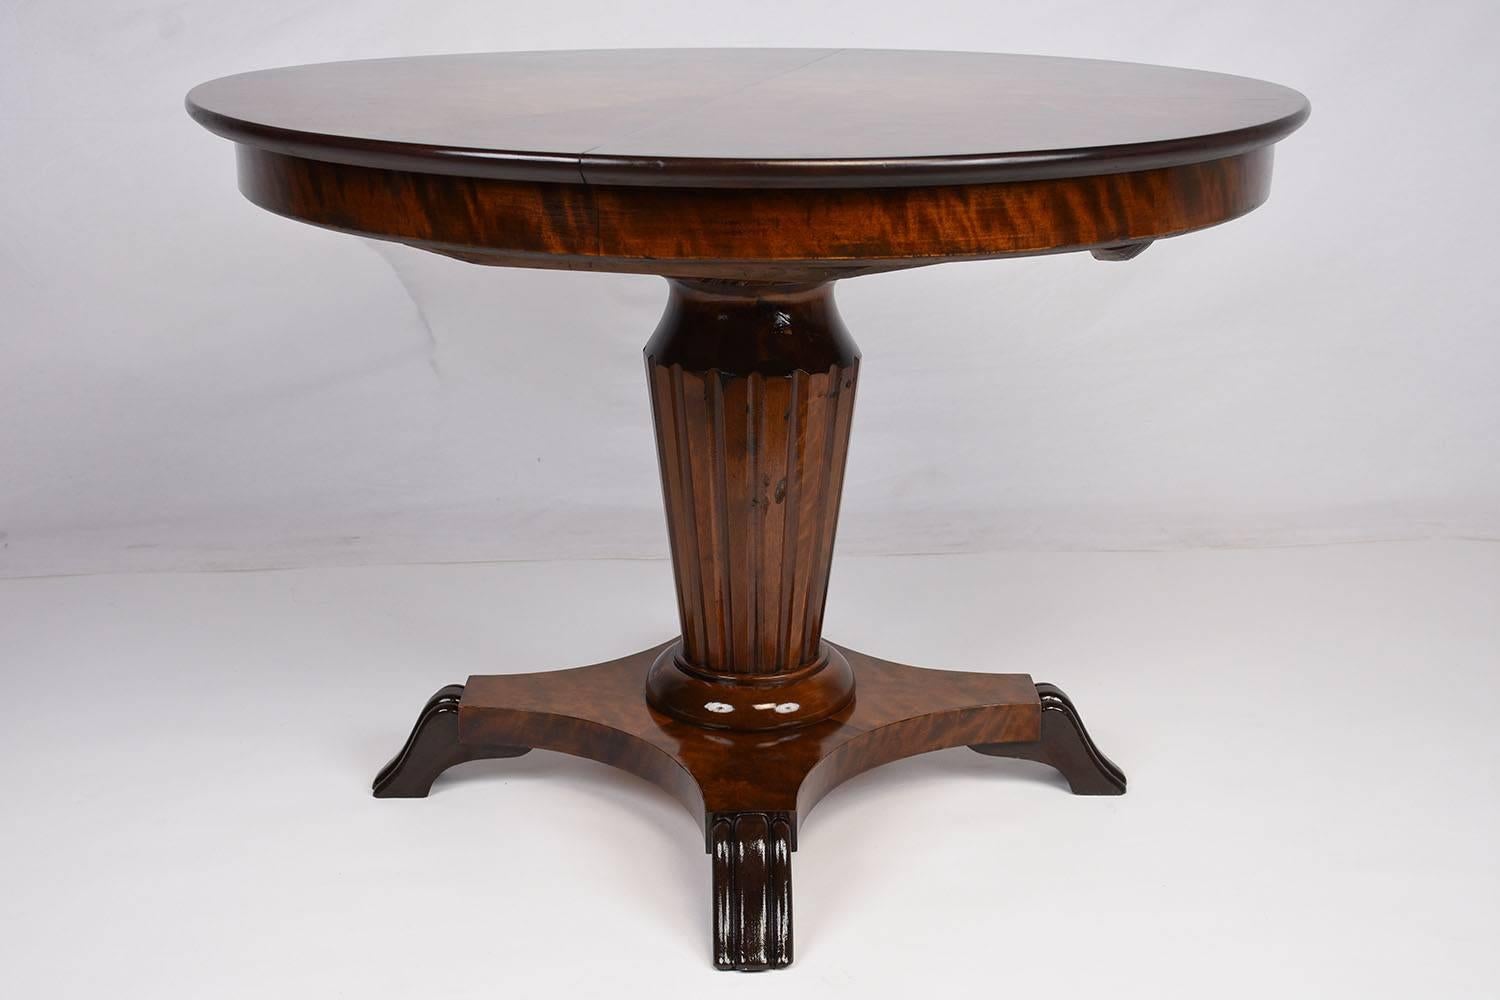 This 1900s Antique Regency style side table is made of mahogany wood that features burl wood veneers stained in a rich mahogany color. The top of the table is adorned with geometric veneers that come together. The carved pedestal legs feature fluted